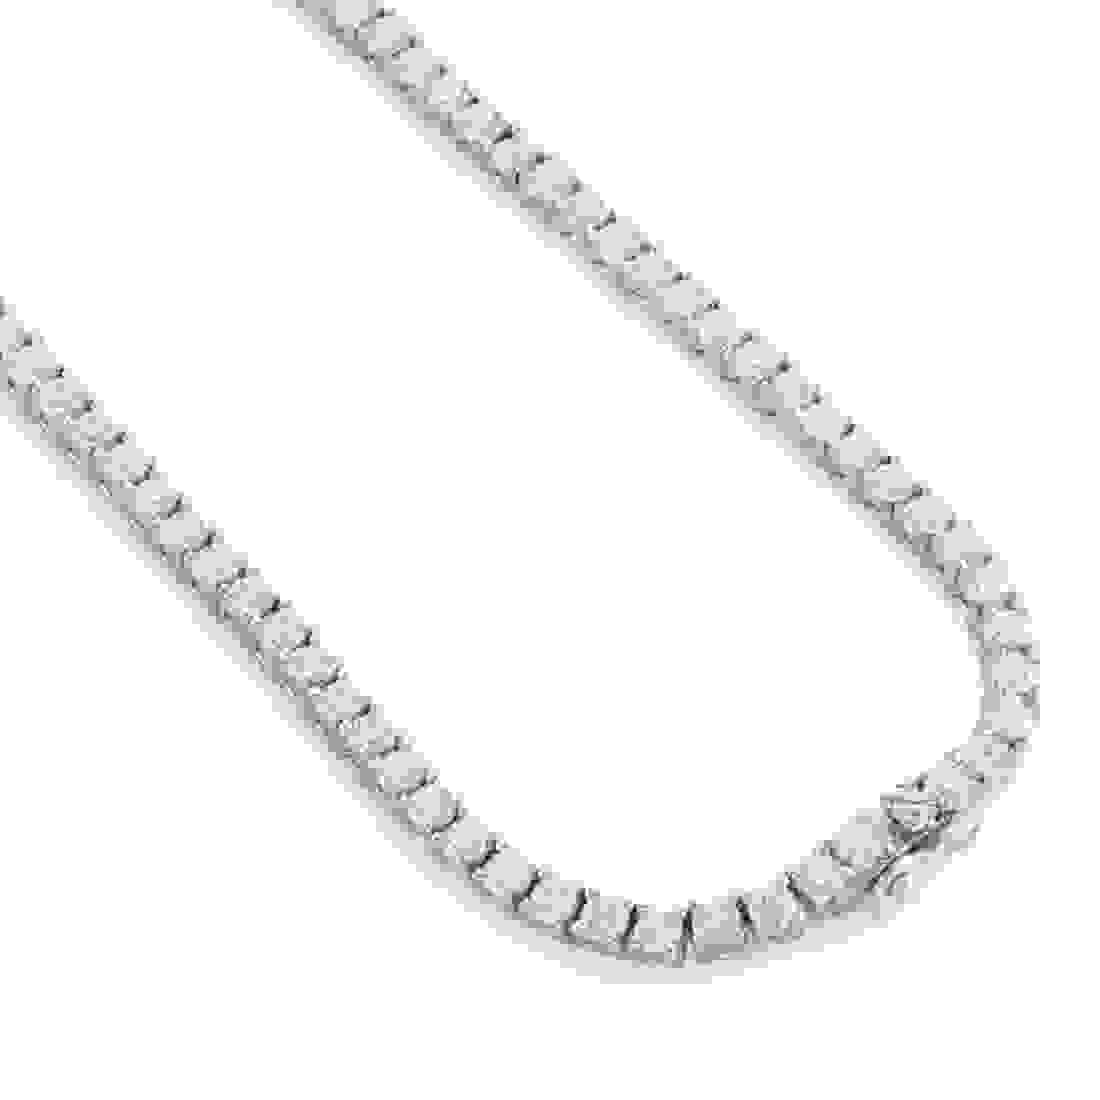 King Ice White Gold Plated Tennis Chain 4mm 22" CHX01220